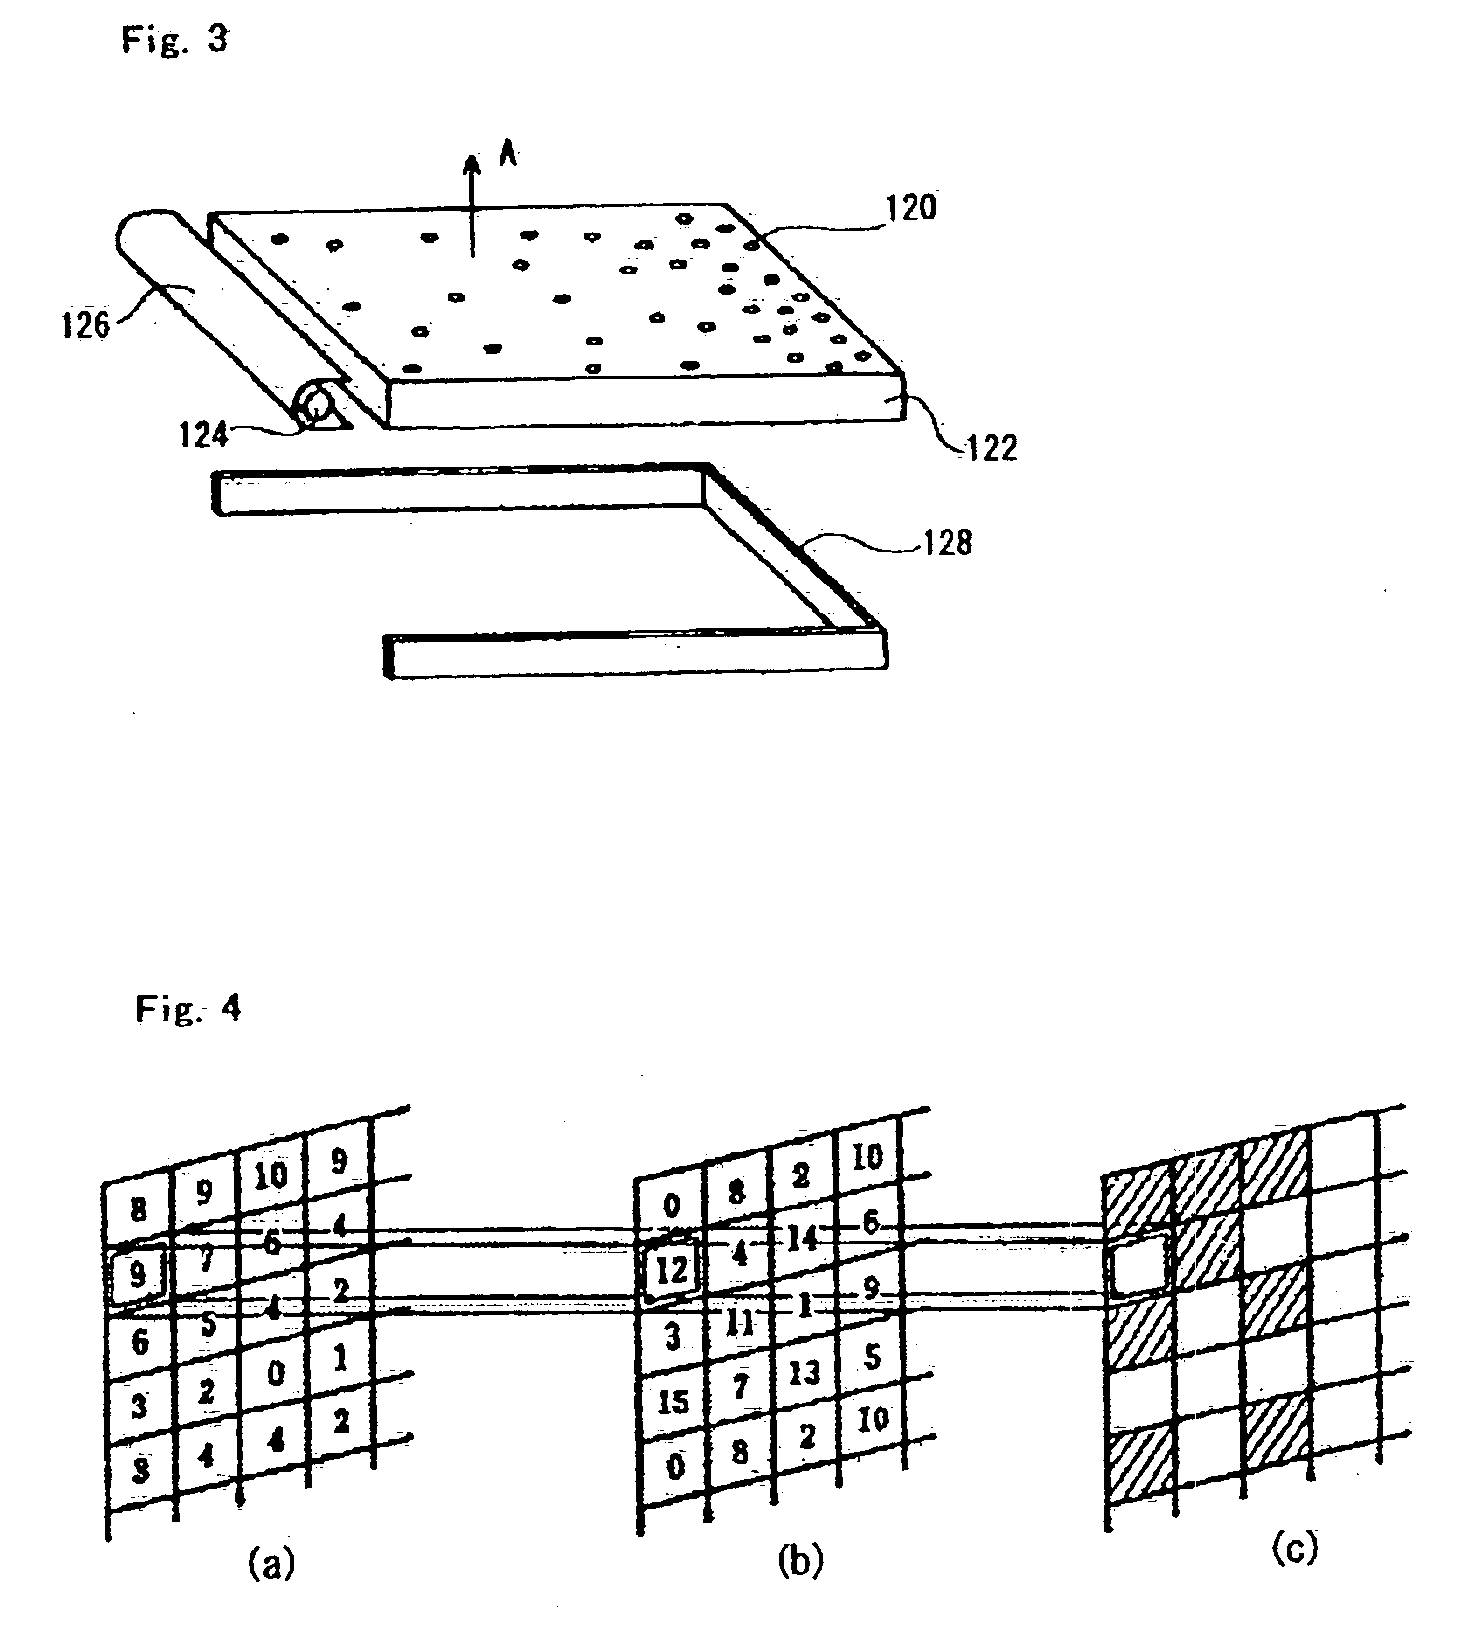 Discrete pattern, apparatus, method, and program storage device for generating and implementing the discrete pattern